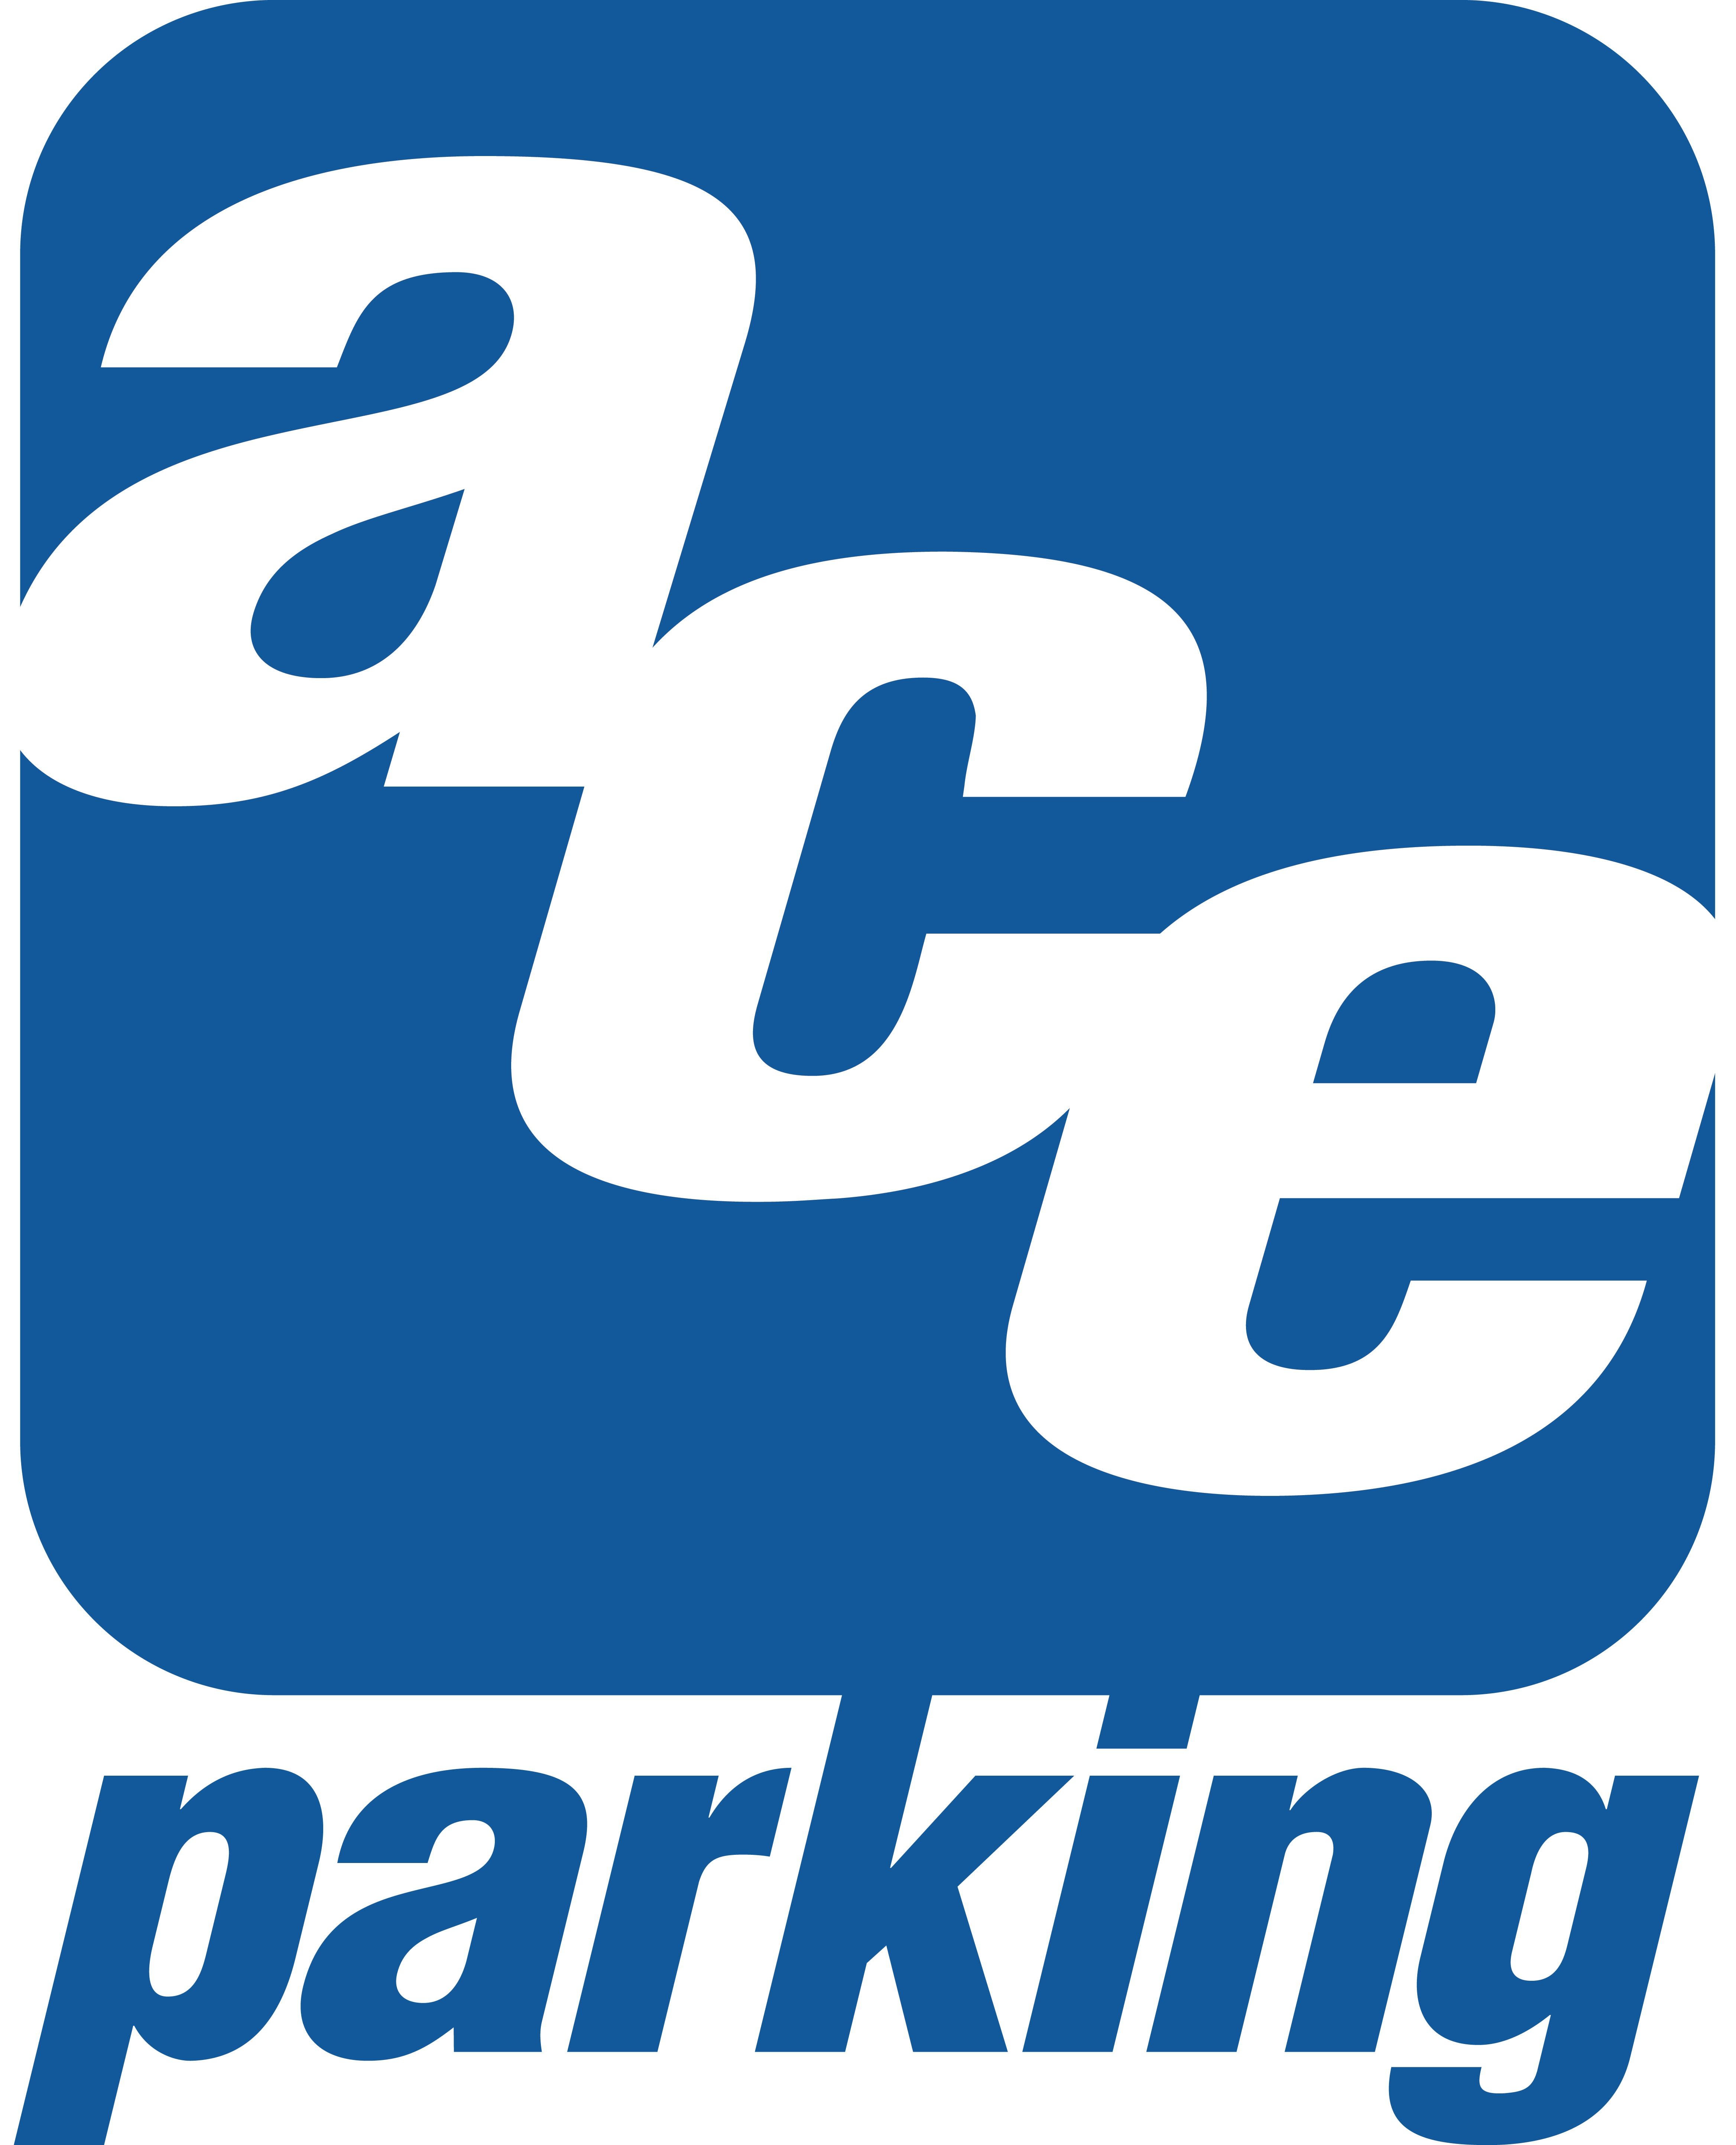 Ace Parking Taps ControlScan for MultiLocation IT Security and Compliance